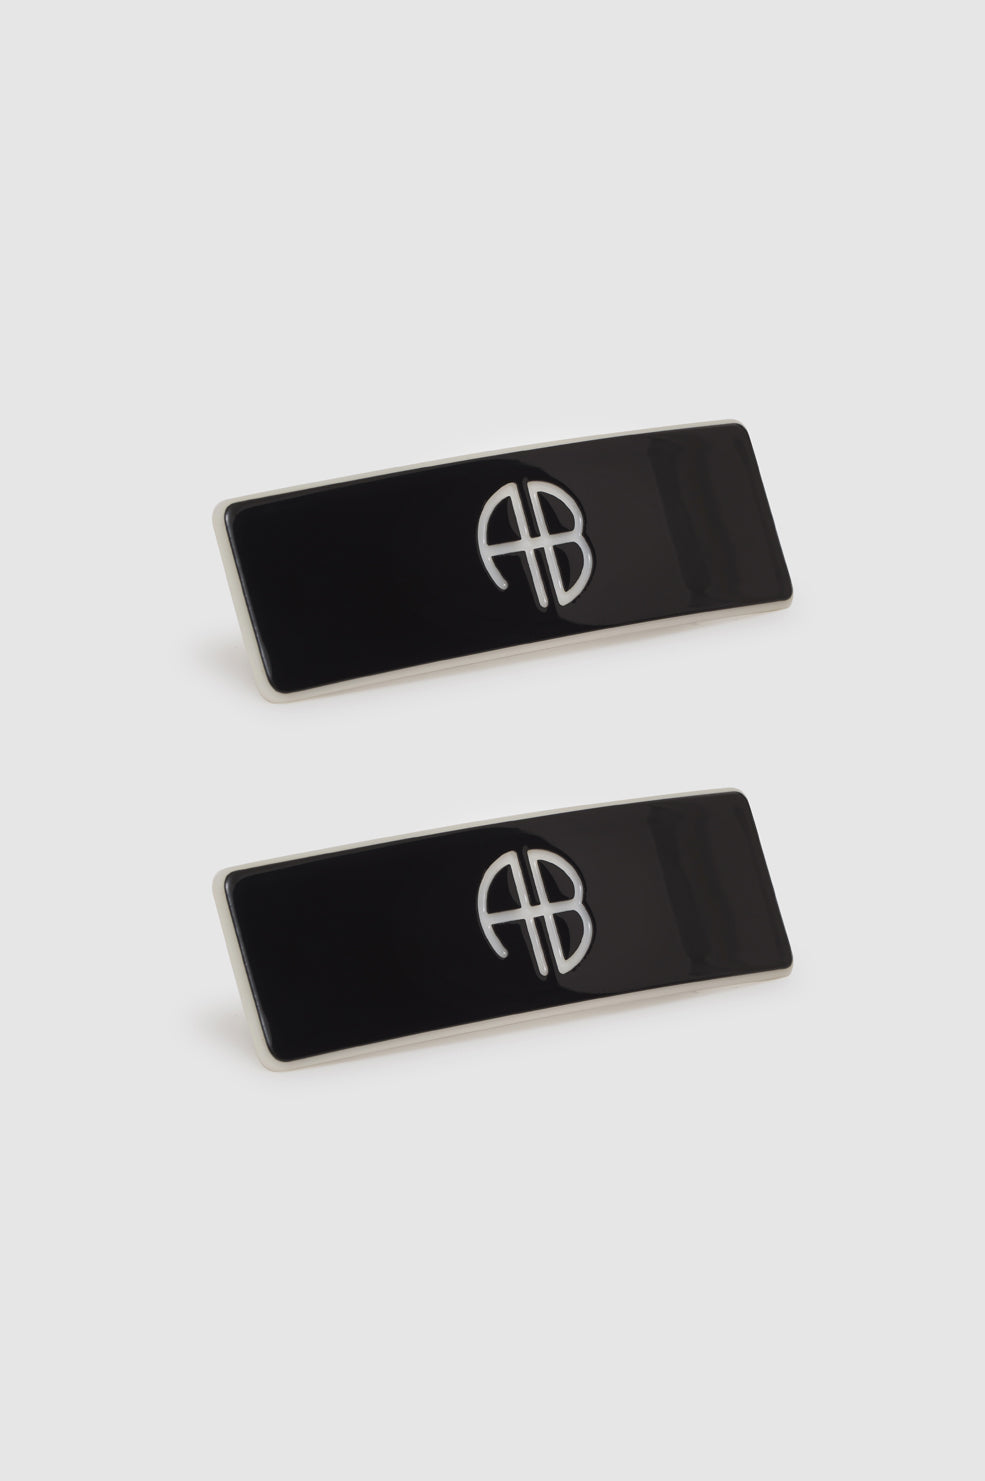 ANINE BING AB Hair Clip 2 Pack - Black - Side Angle View Both